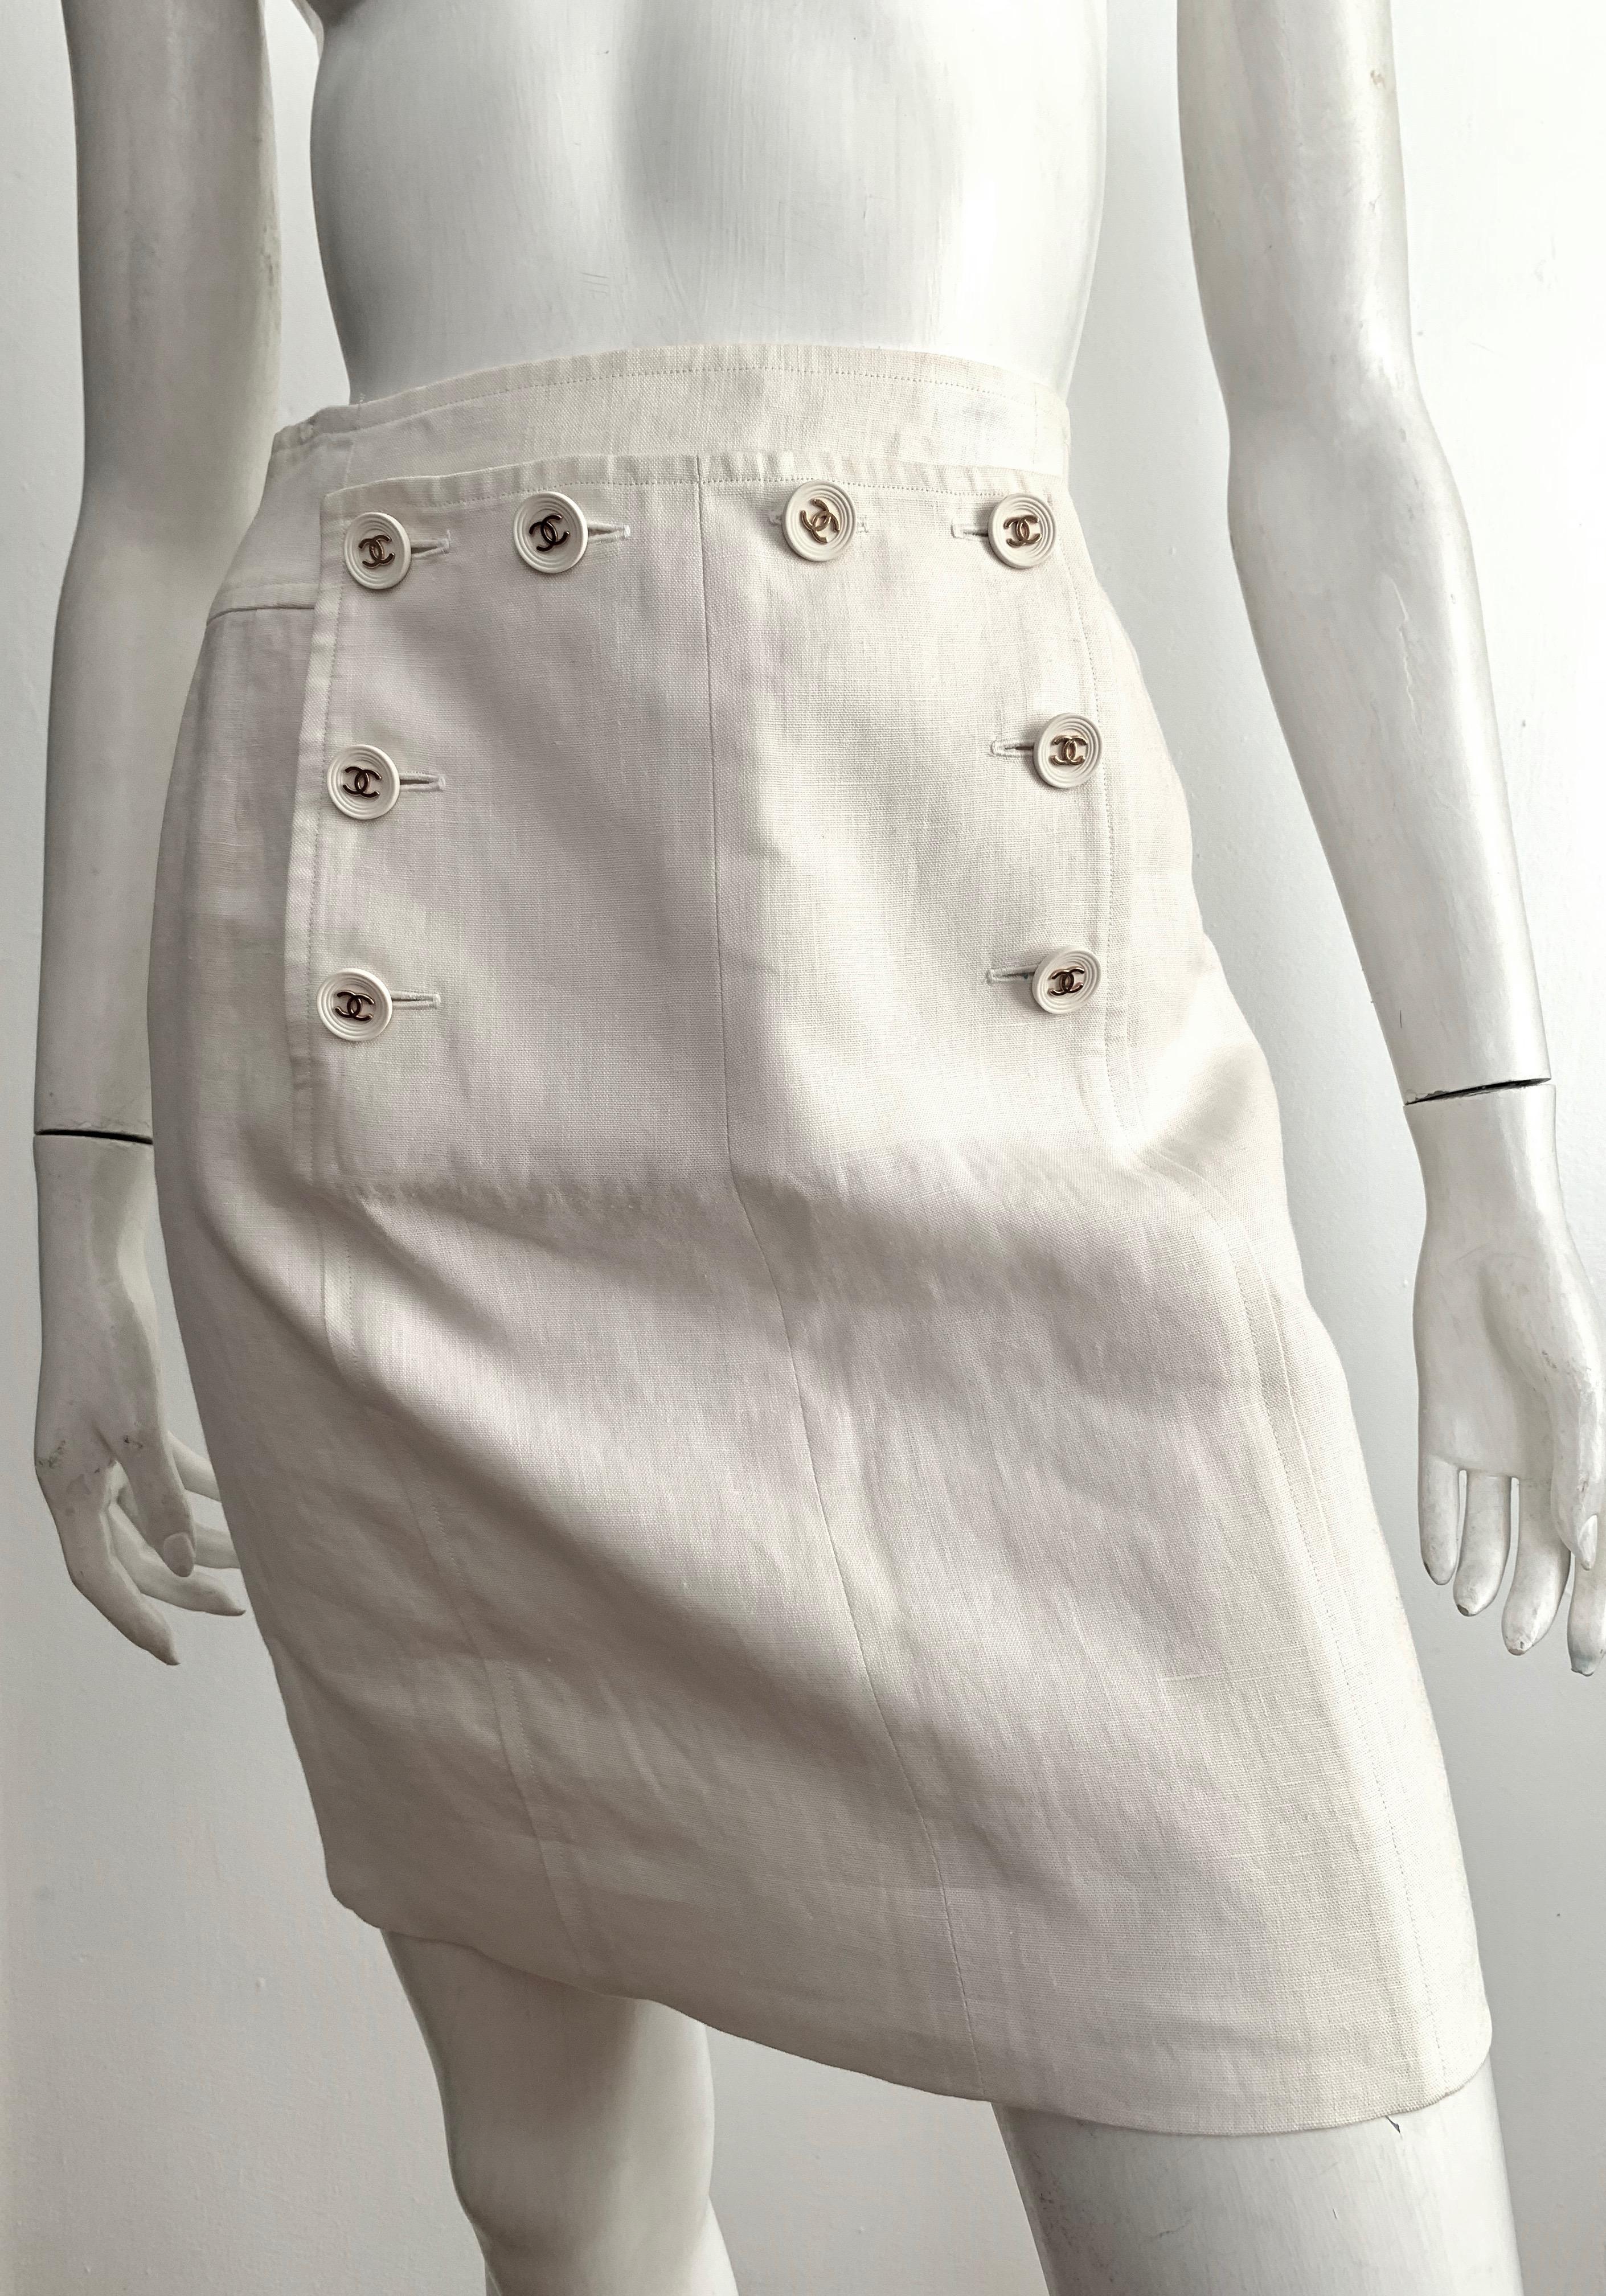 Chanel 1994 Spring Collection cream linen short skirt is a French size 38 and fits a size 4. 
Skirt is silk lined.
There are 8 logo Chanel buttons on front of skirt.
Skirt has a 27